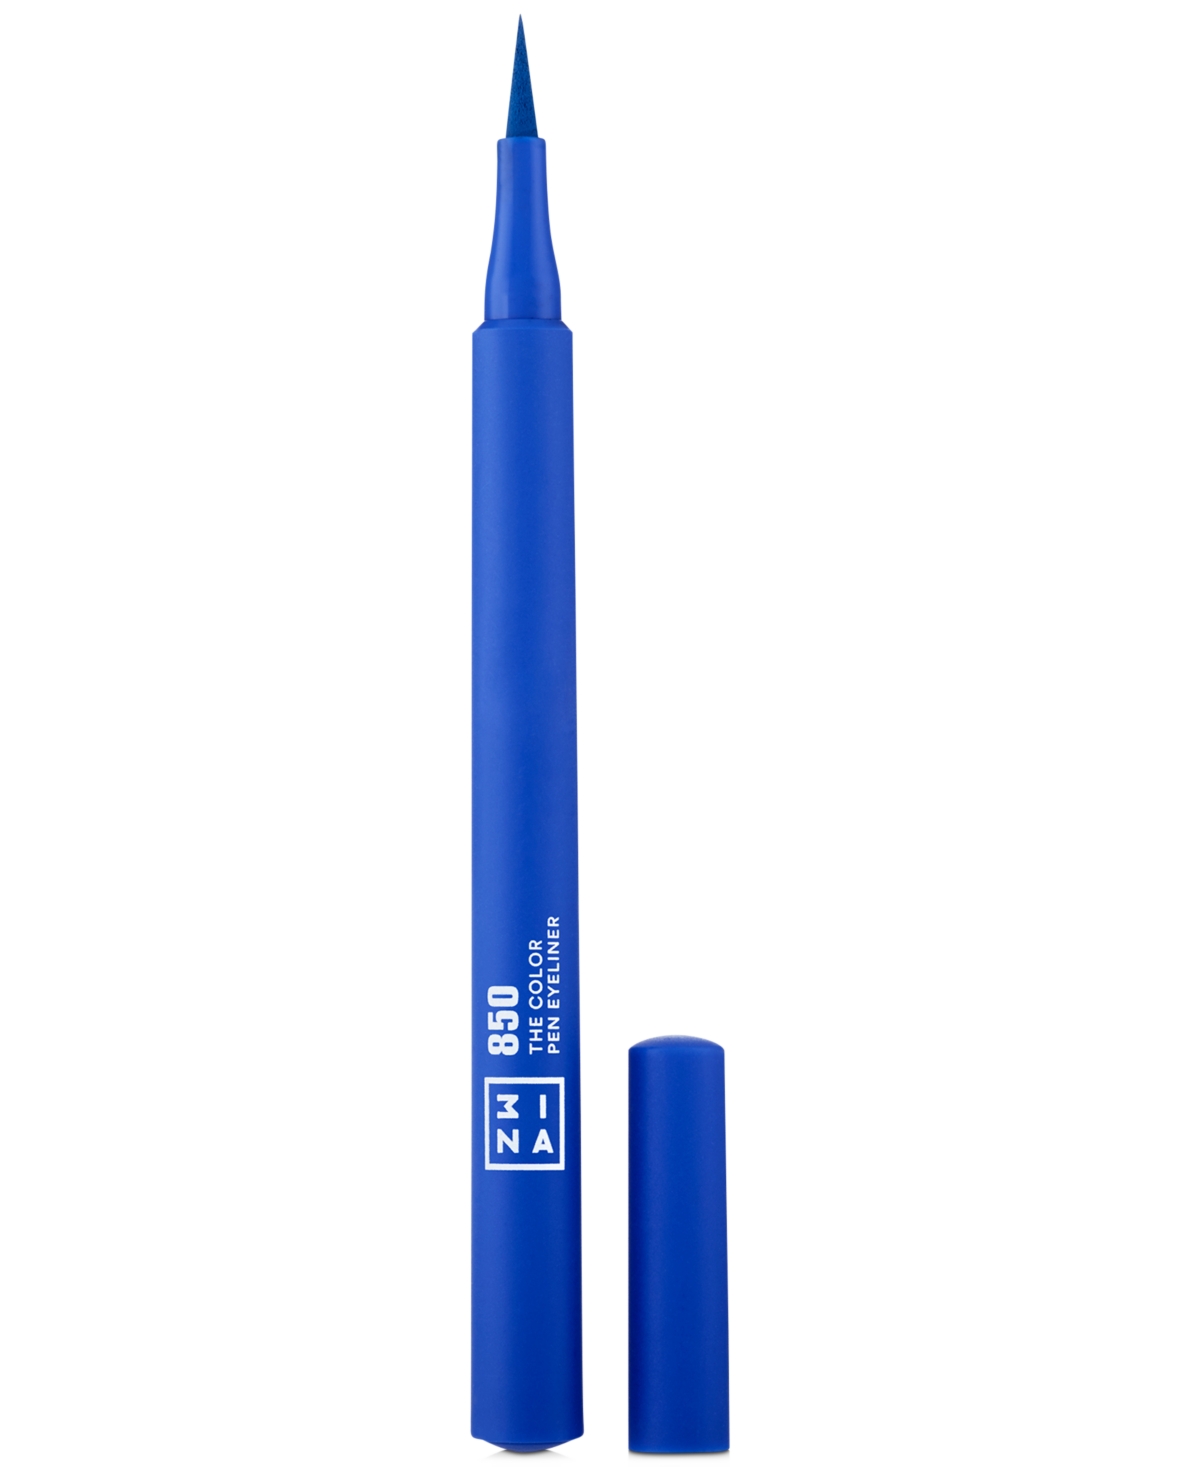 3ina The Color Pen Eyeliner In - Blue